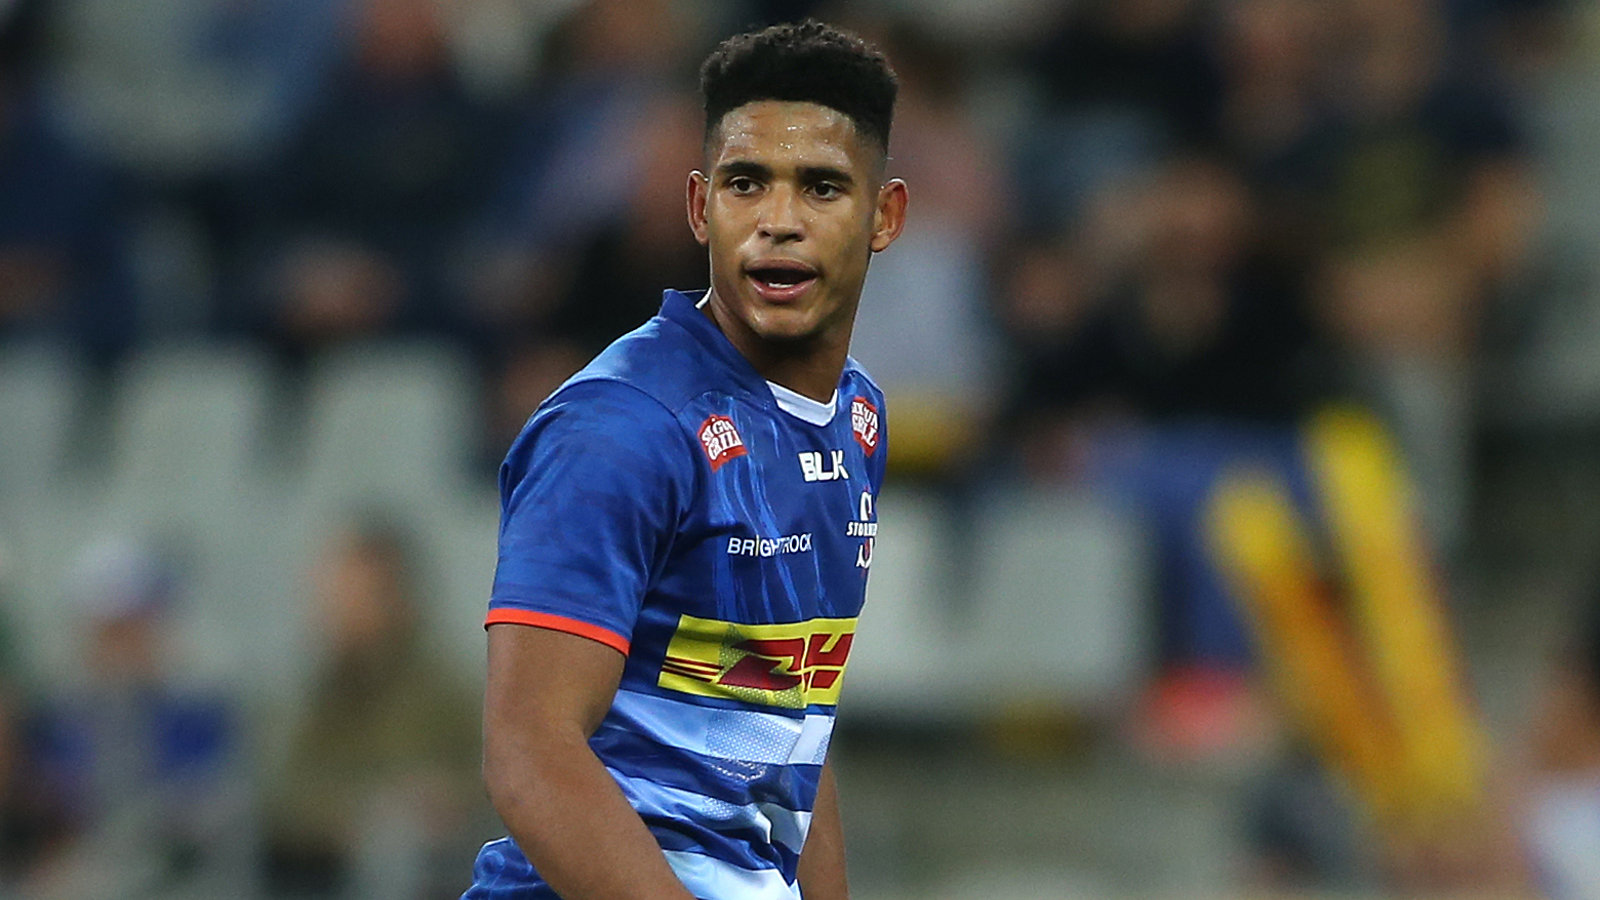 springboks hopeful included in stormers squad for overseas tour